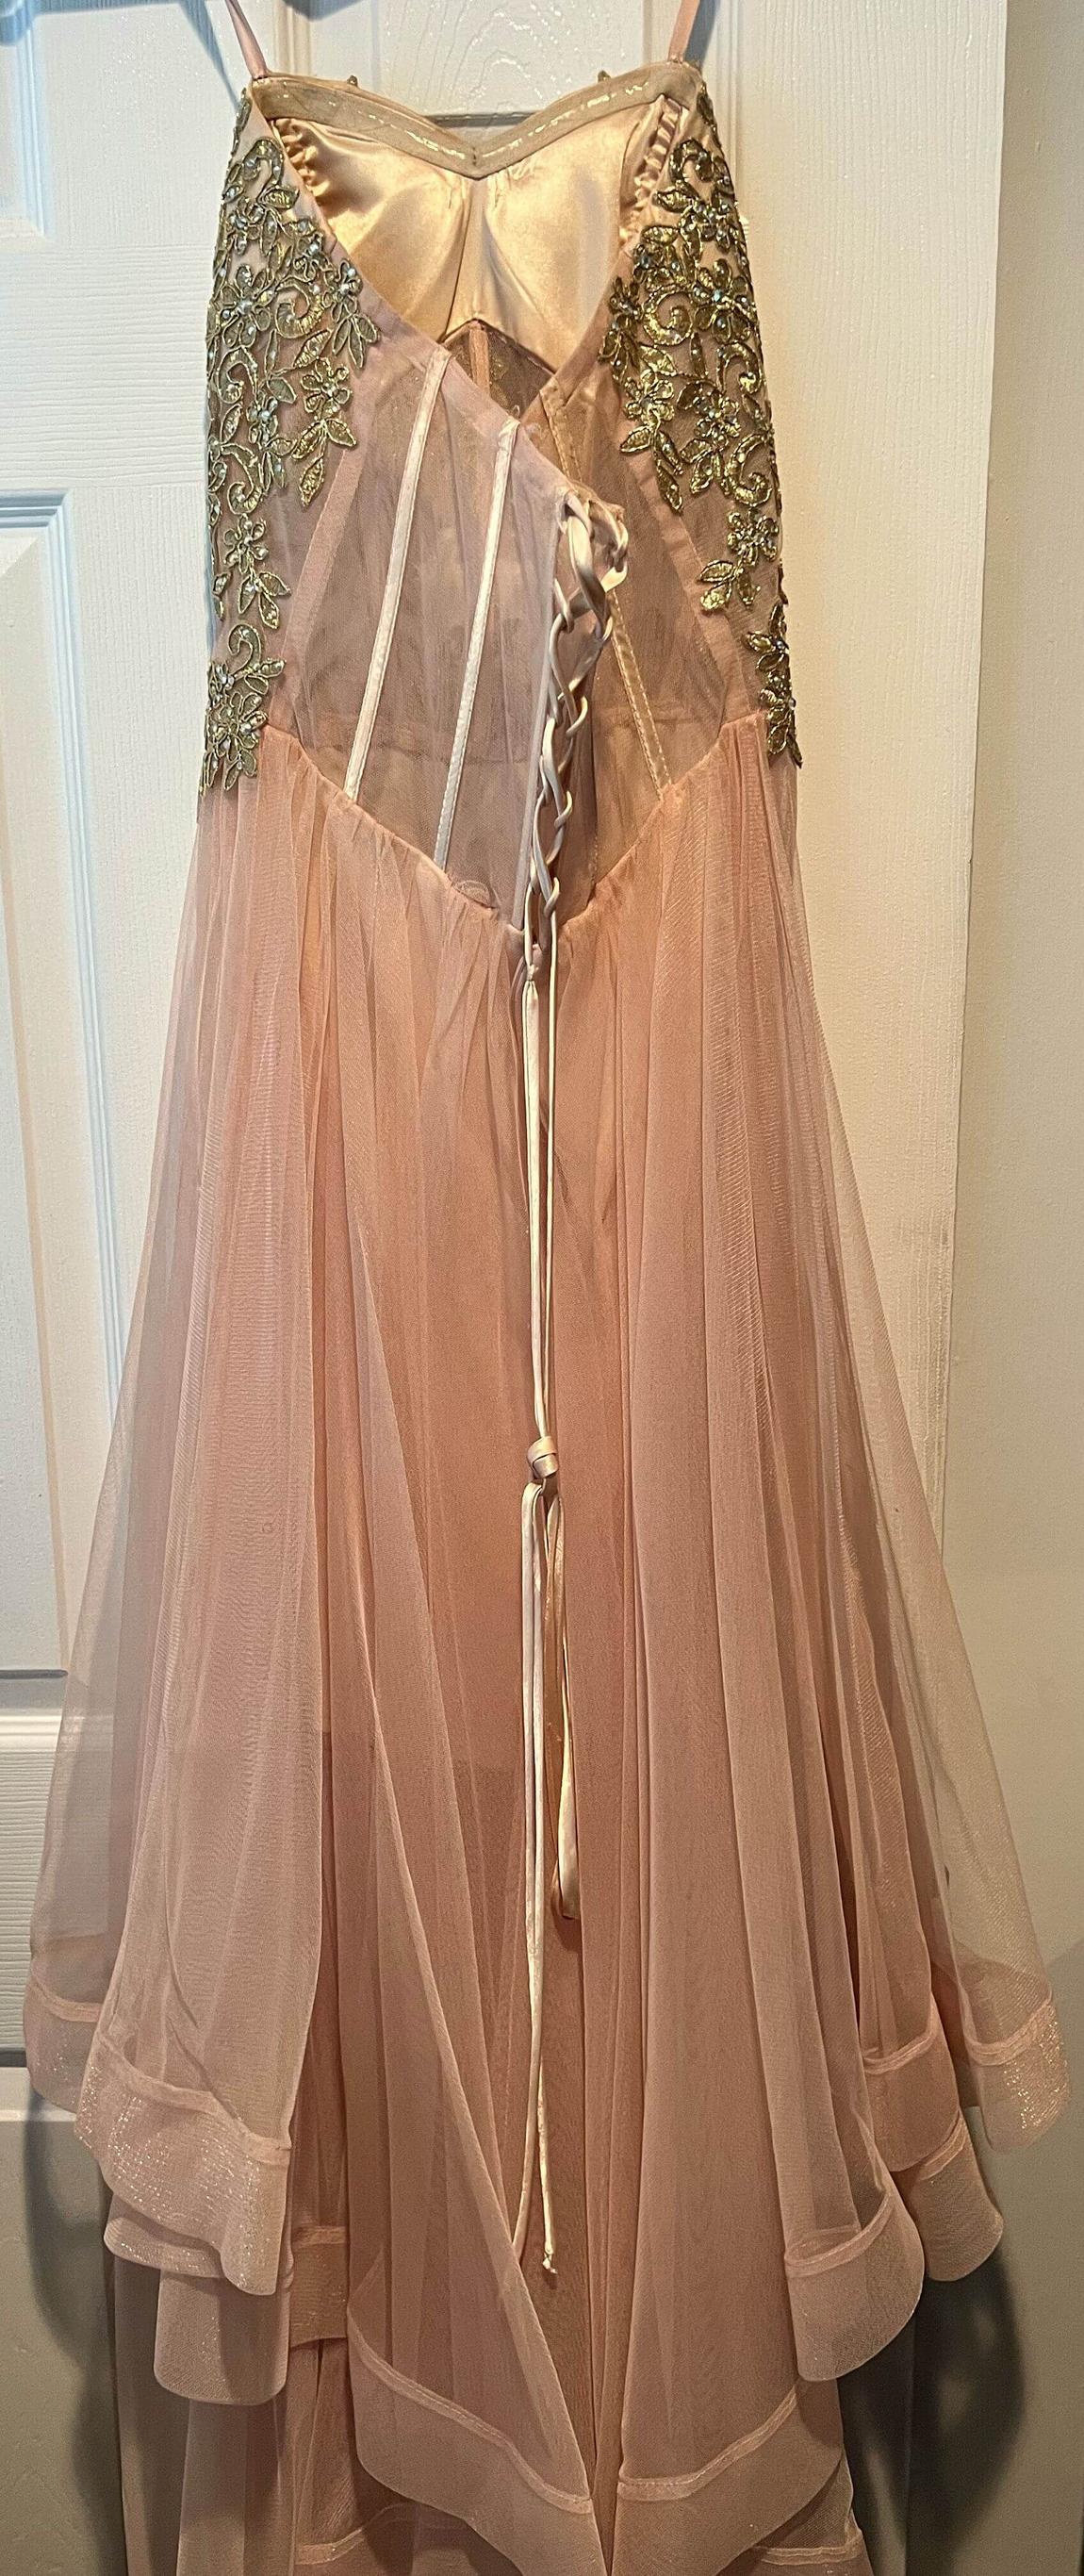 Camille La Vie Girls Size 3 Prom Strapless Lace Light Pink Floor Length Maxi on Queenly